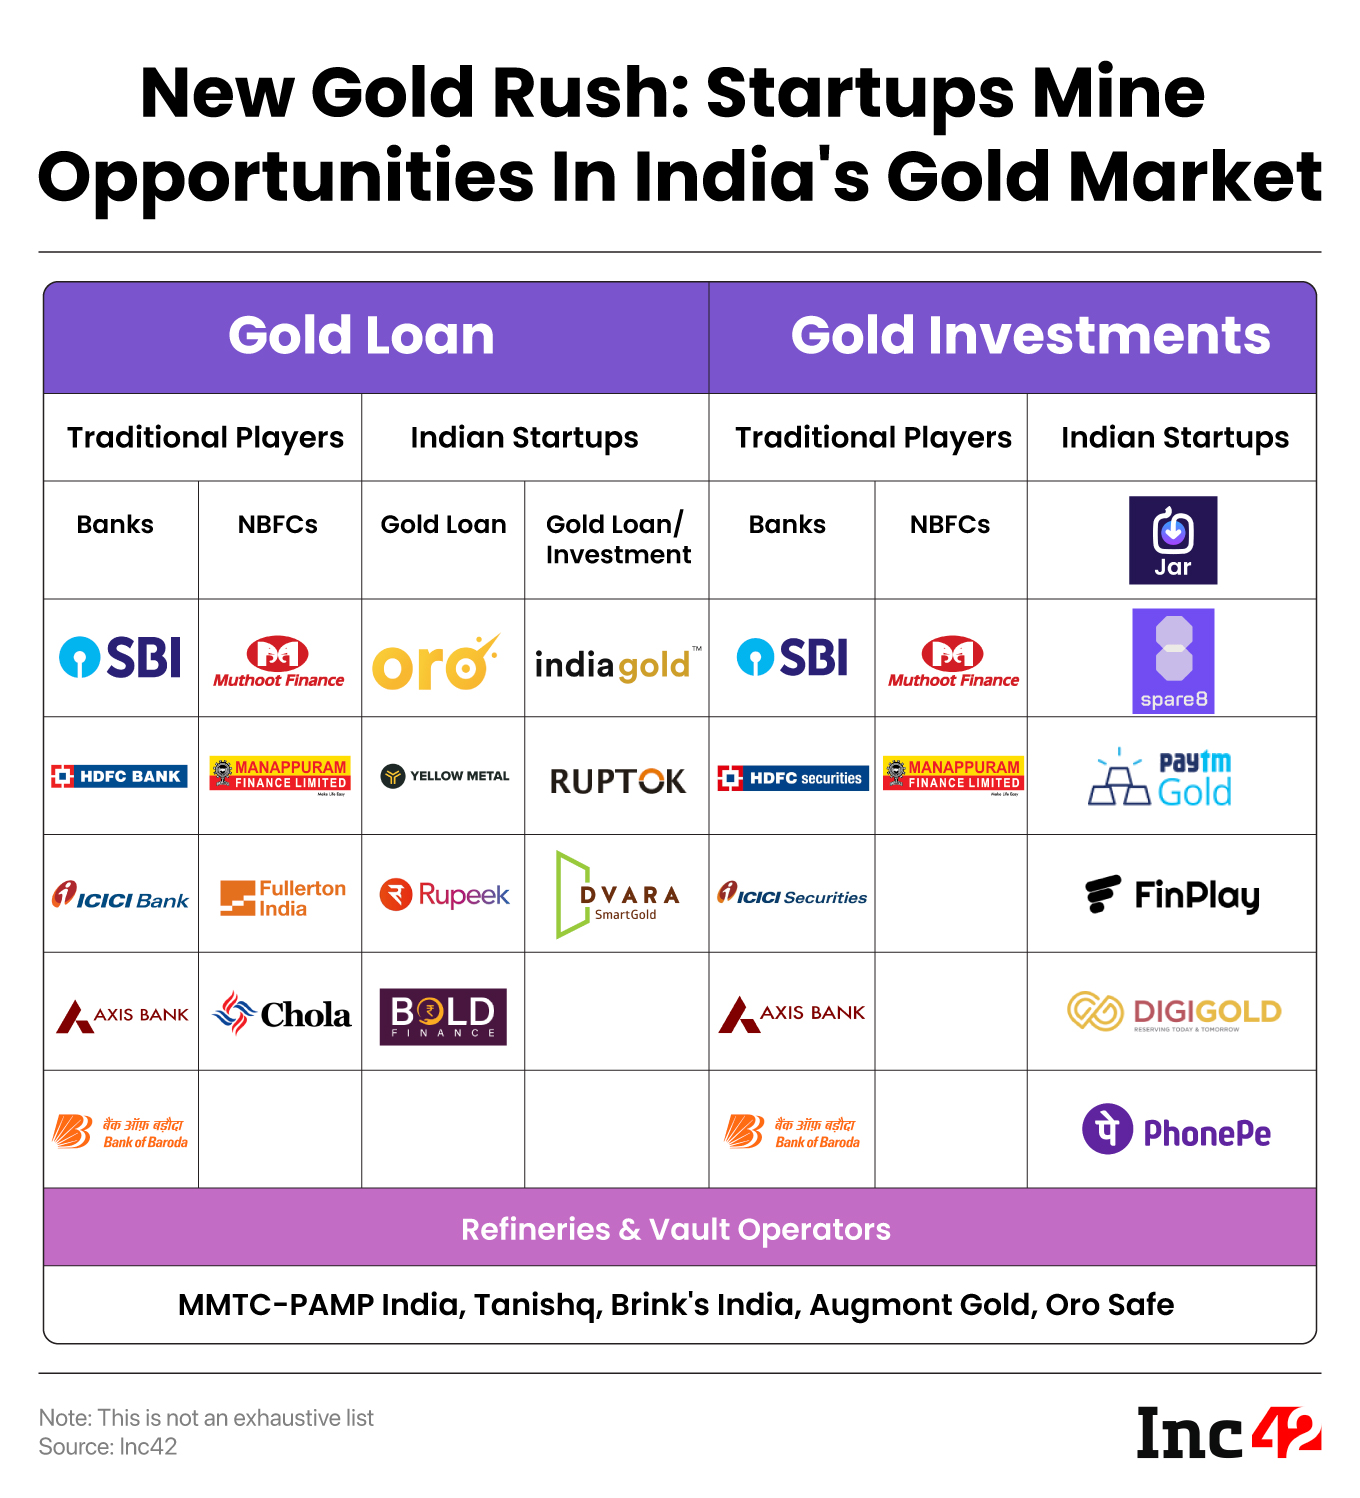 Besides, fintech startups such as Oro Money, Yellow Metal, Rupeek and Bold Finance have evolved to offer users loans against gold in a hassle-free and paperless manner.